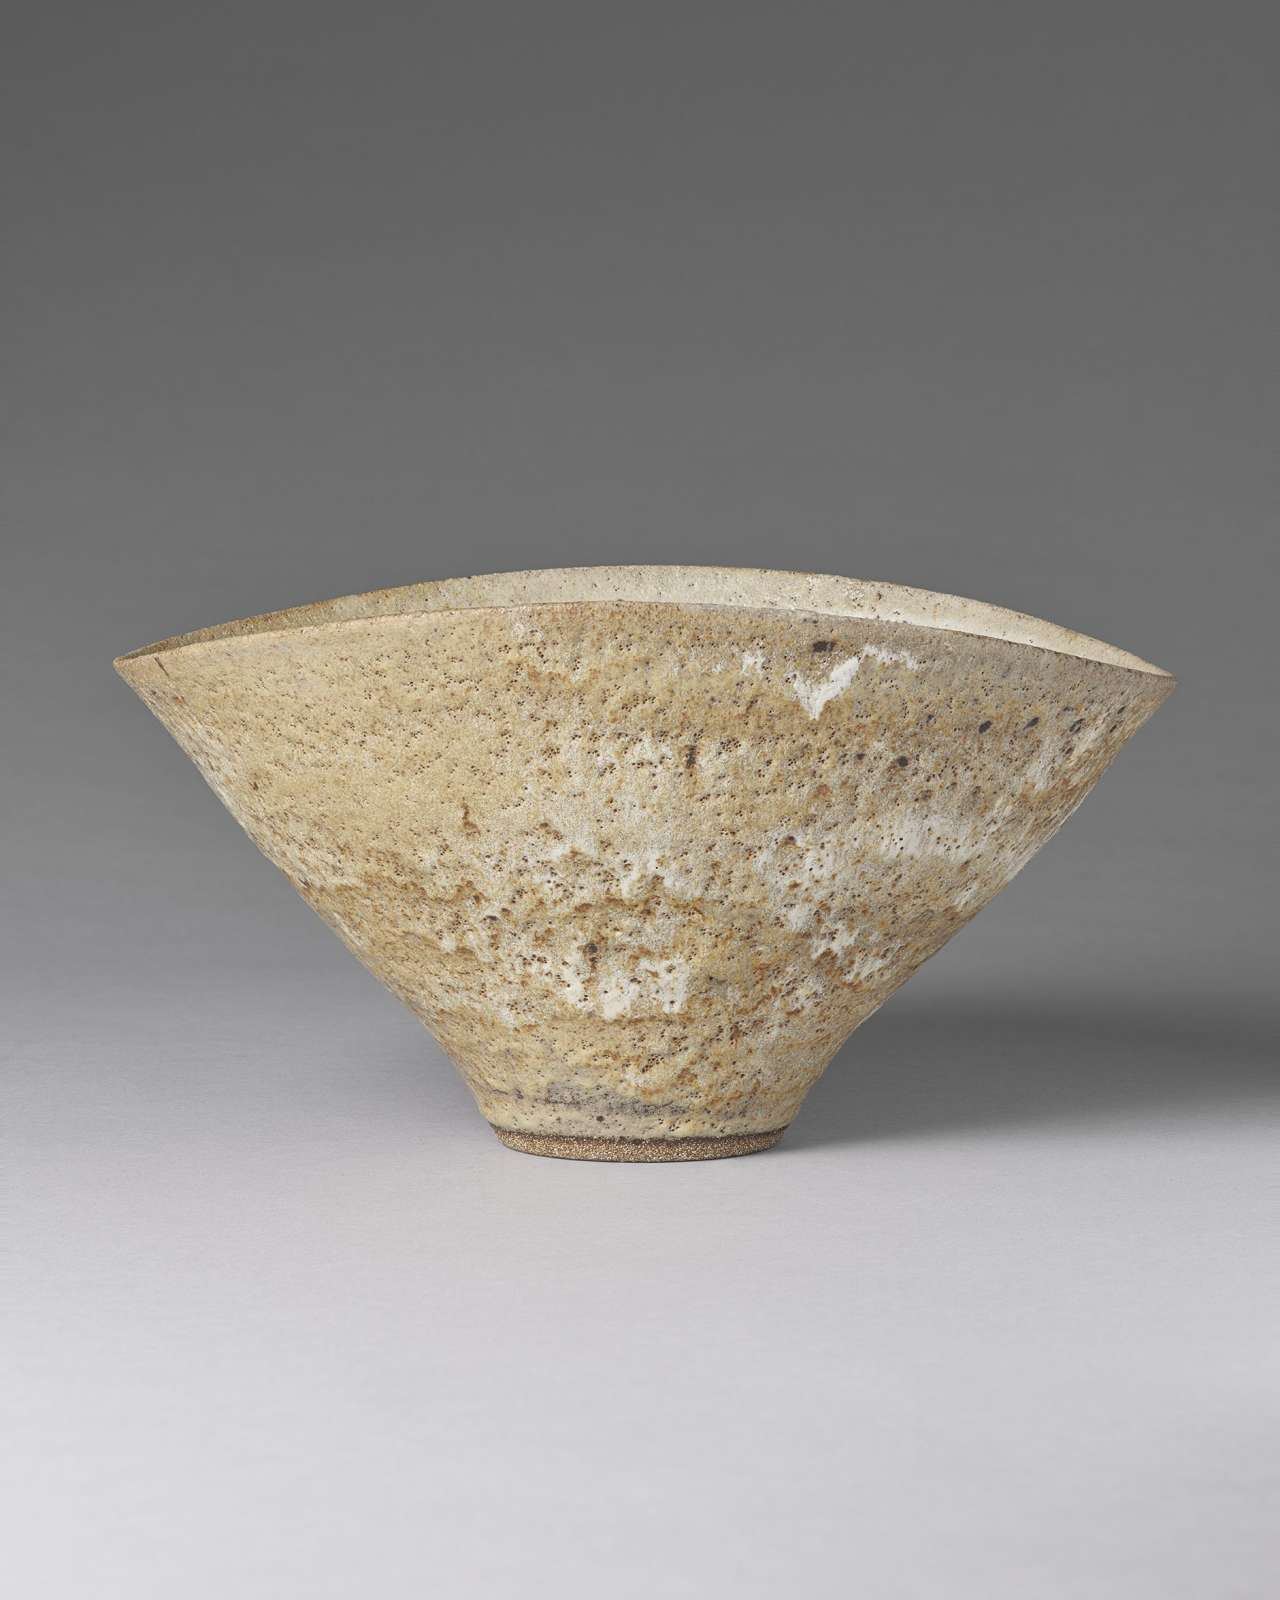 Lucie Rie, Large Squeezed Bowl, 1972, impressed with the artist’s monogram, stoneware with an all-over pitted glaze, Diameter: 33cm / 13 inches